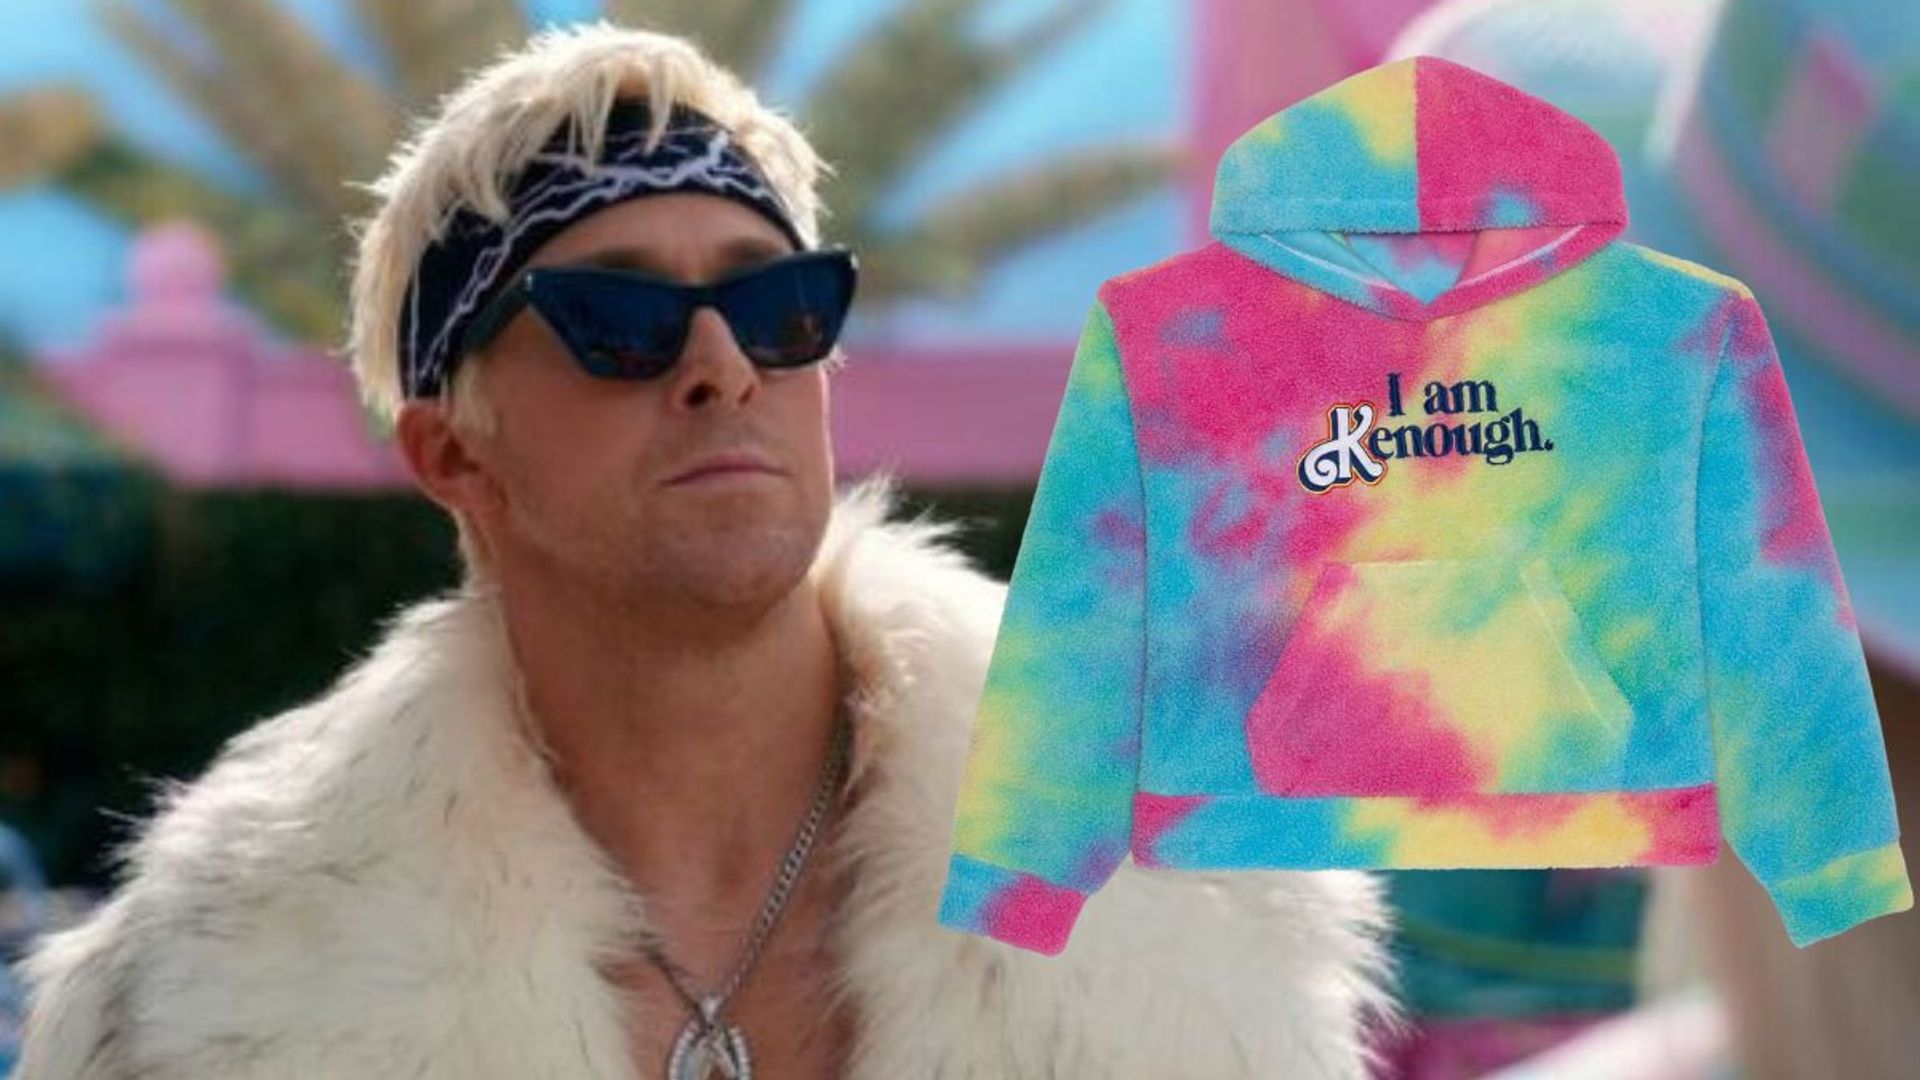 How To Buy Ryan Goslings Viral “i Am Kenough” Hoodie Before It Sells Out Hello 